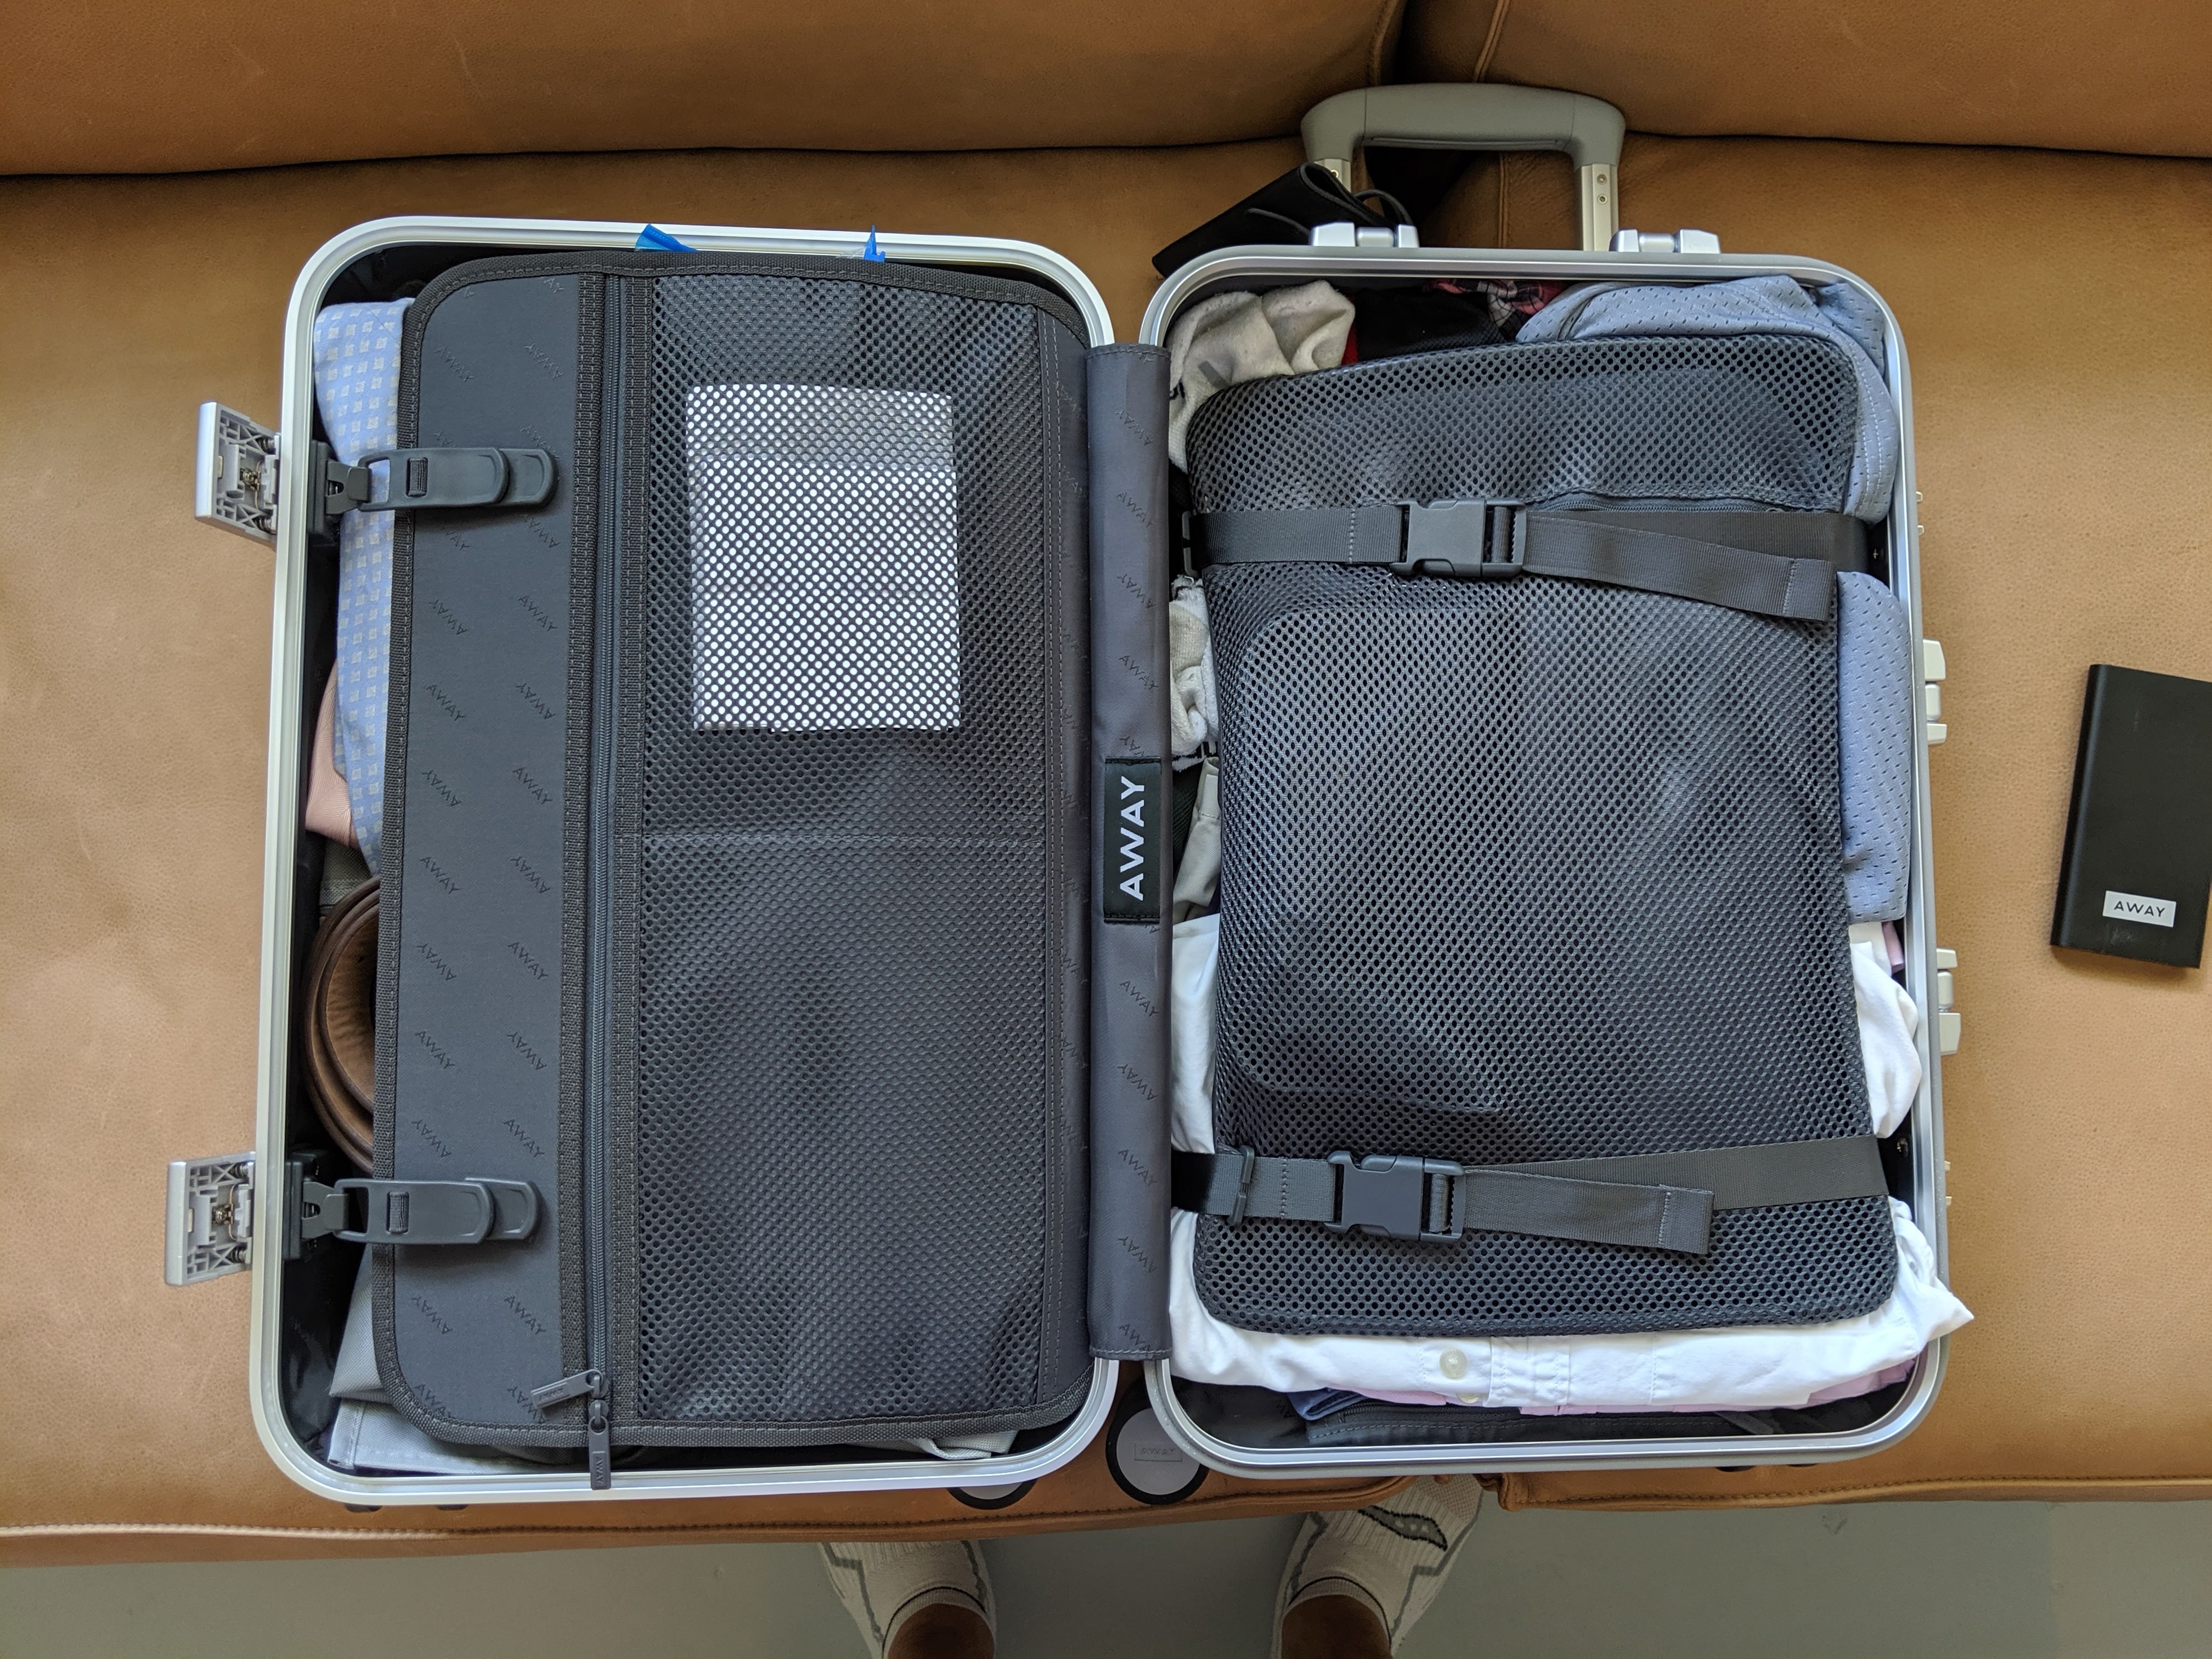 AWAY LUGGAGE UNBOXING & REVIEW 